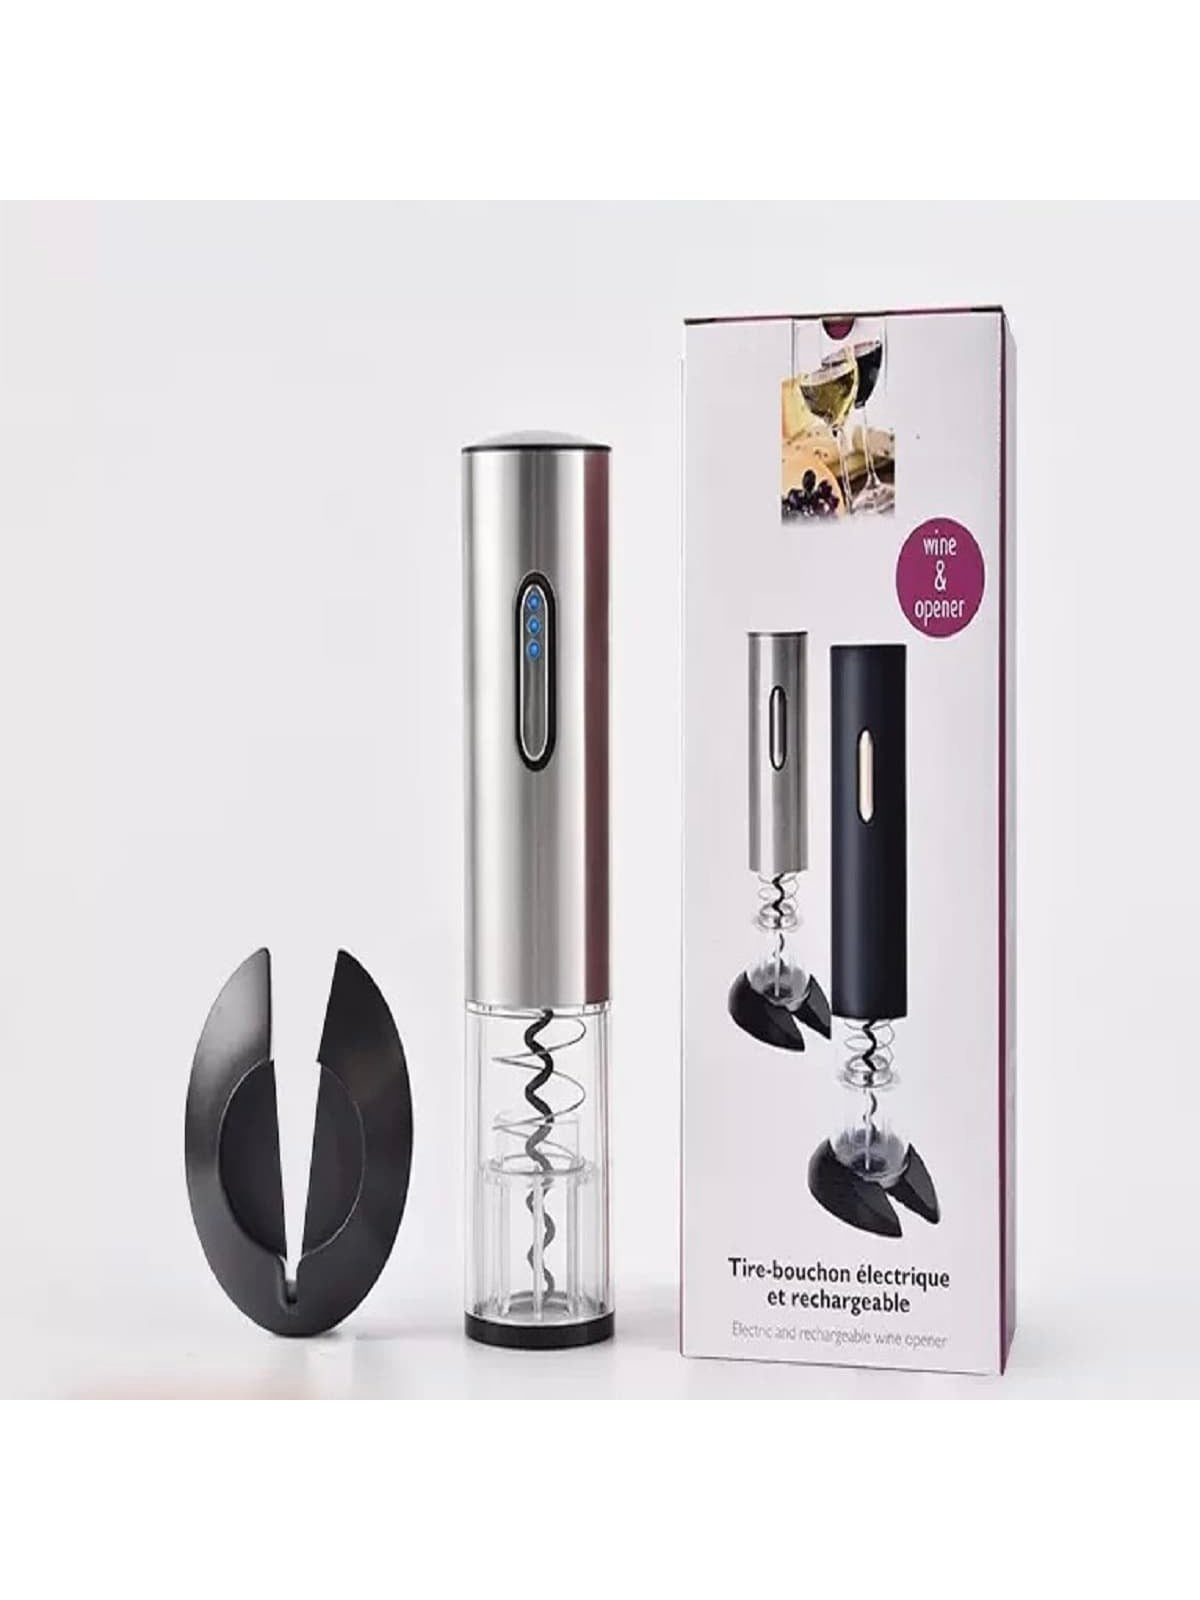 One click start electric wine opener Charging Wine opener Automatic electric bottle opener Wine set-silver (set of two)-1